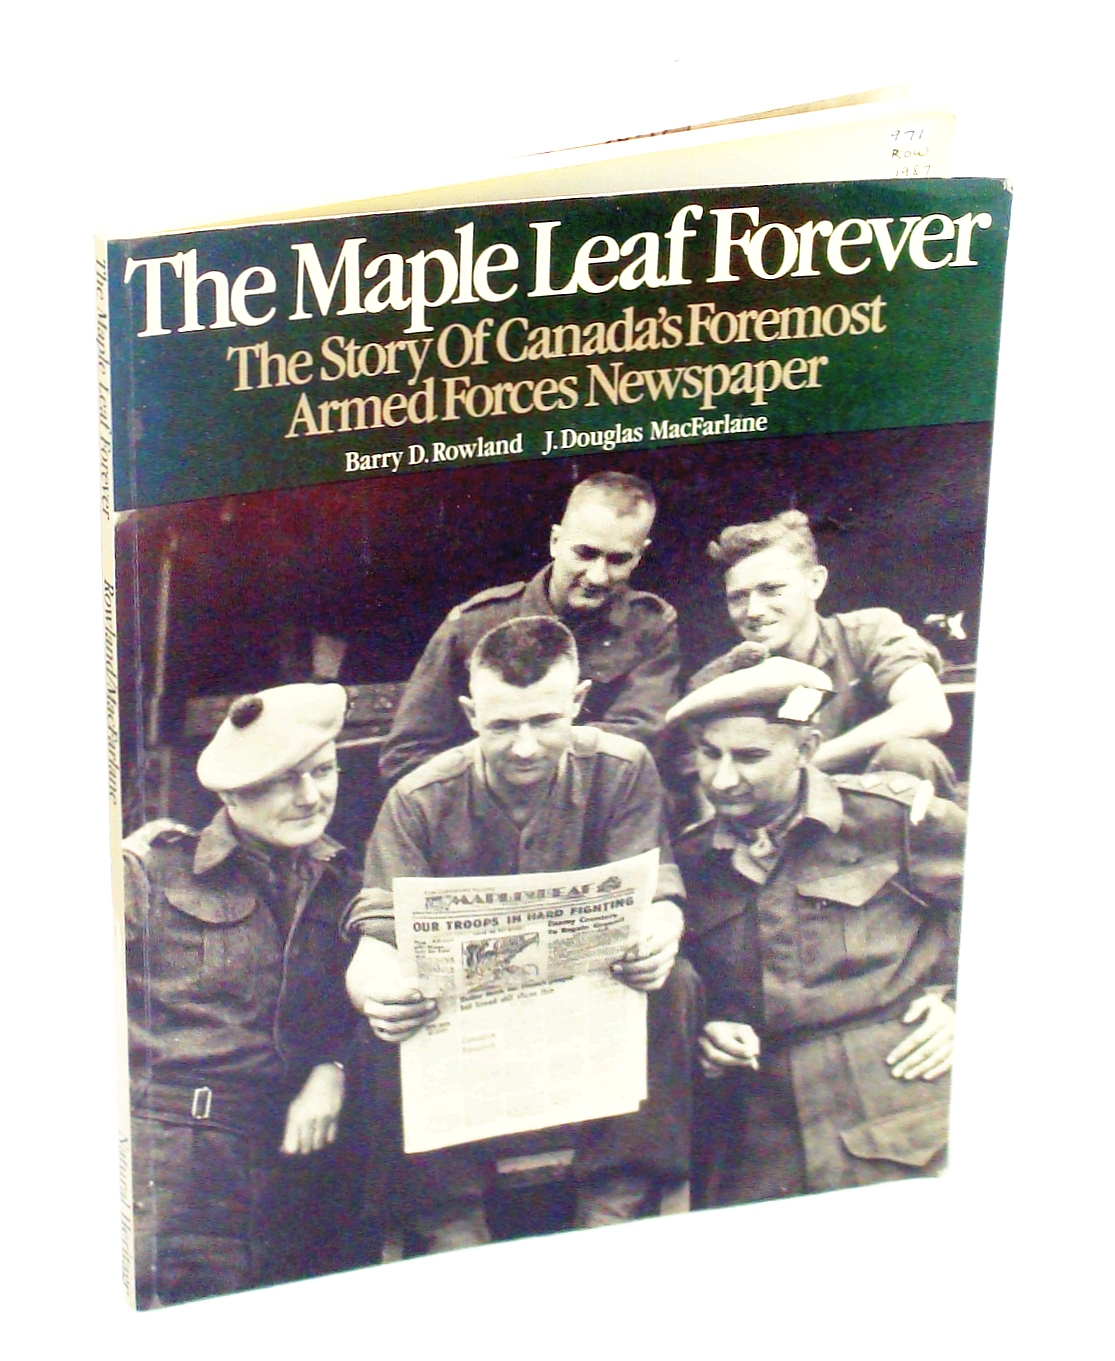 Image for The Maple Leaf Forever - The Story of Canada's Foremost Armed Forces Newspaper